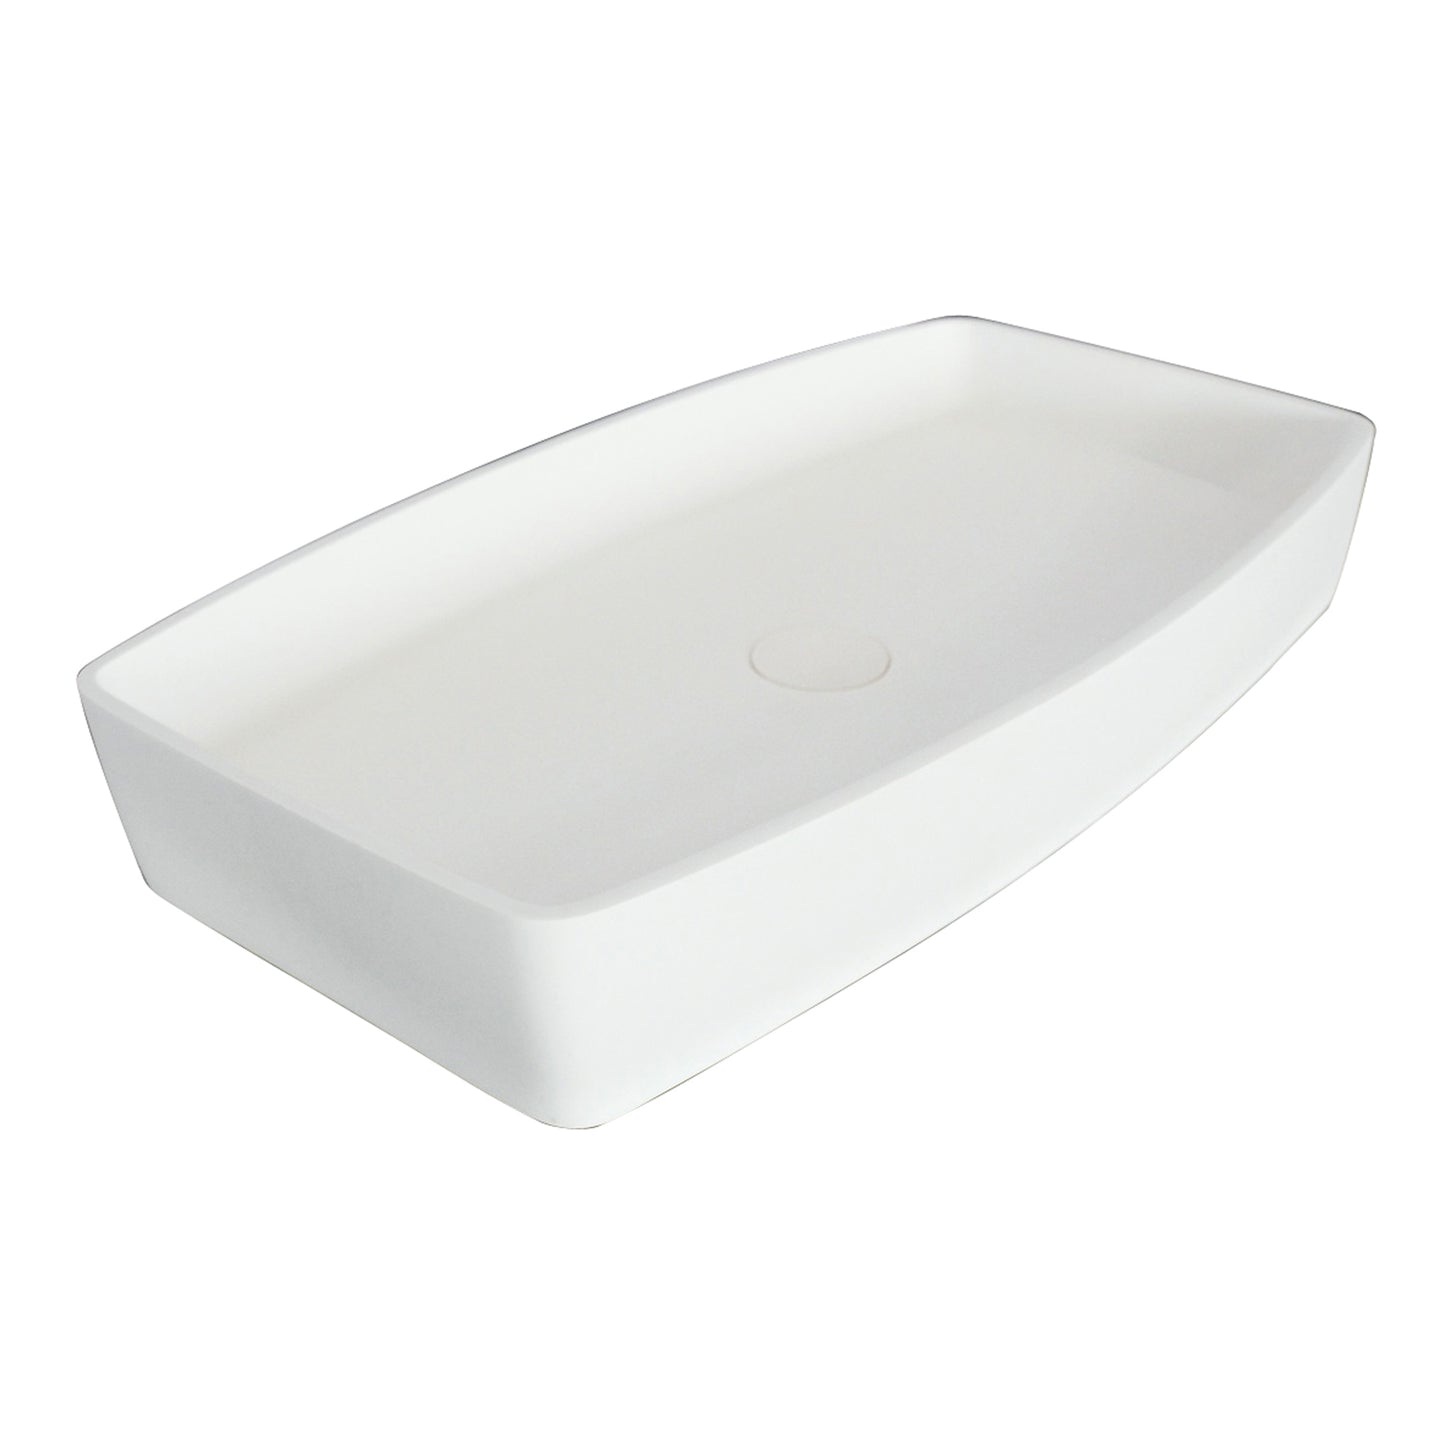 Marbella Resin 27" x 14-1/2" Rectangle Vessel Sink with Gloss White Finish